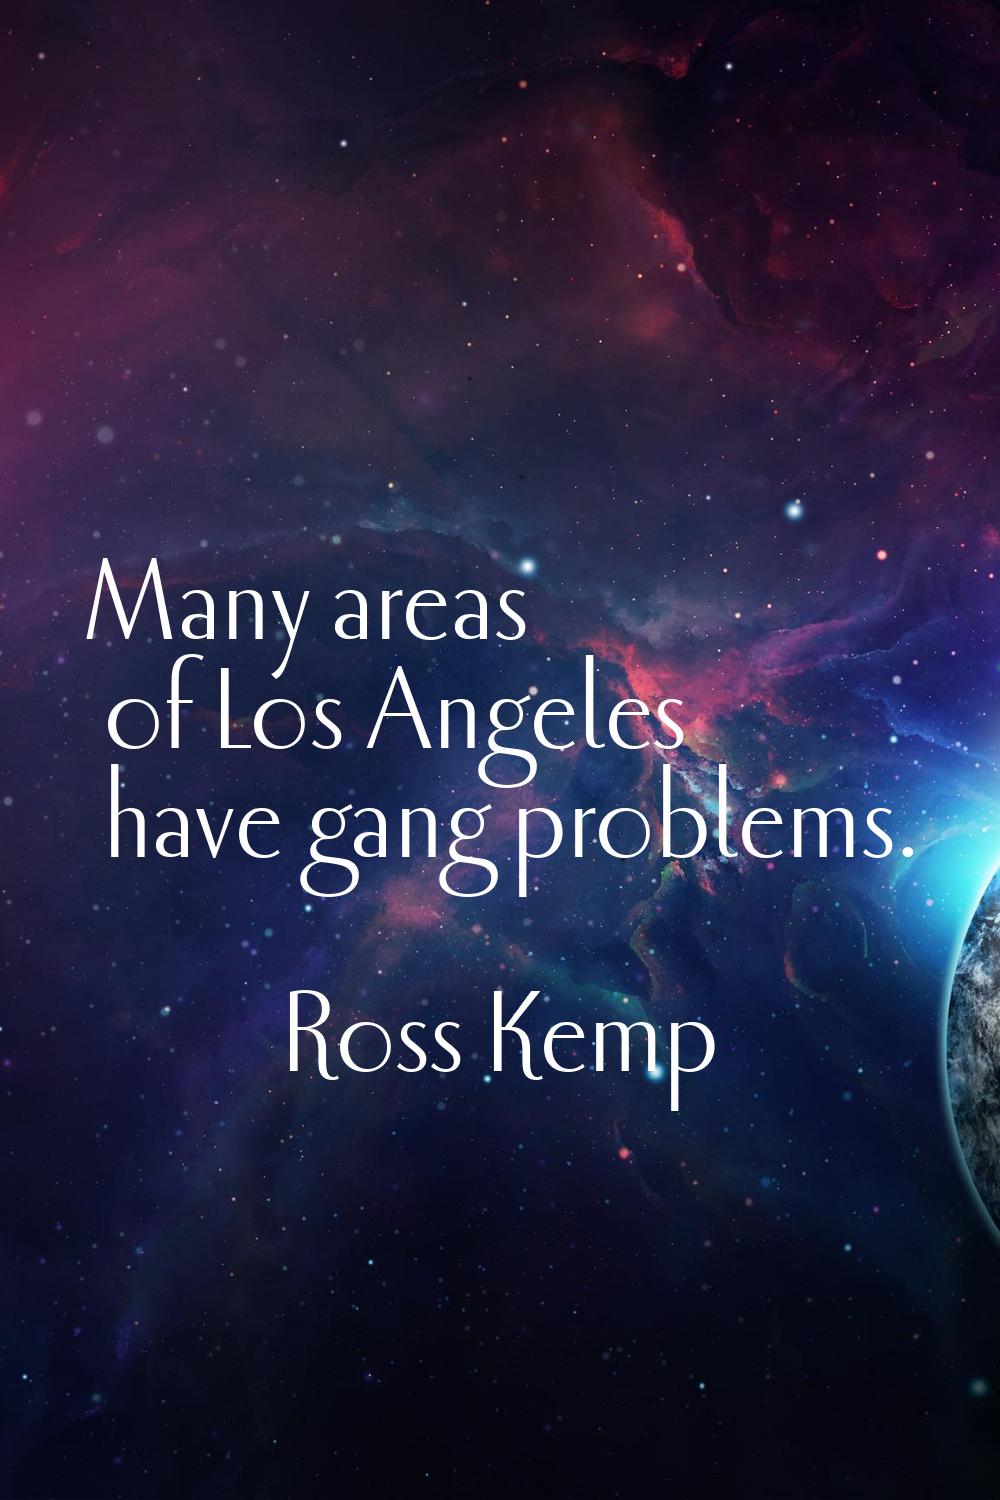 Many areas of Los Angeles have gang problems.